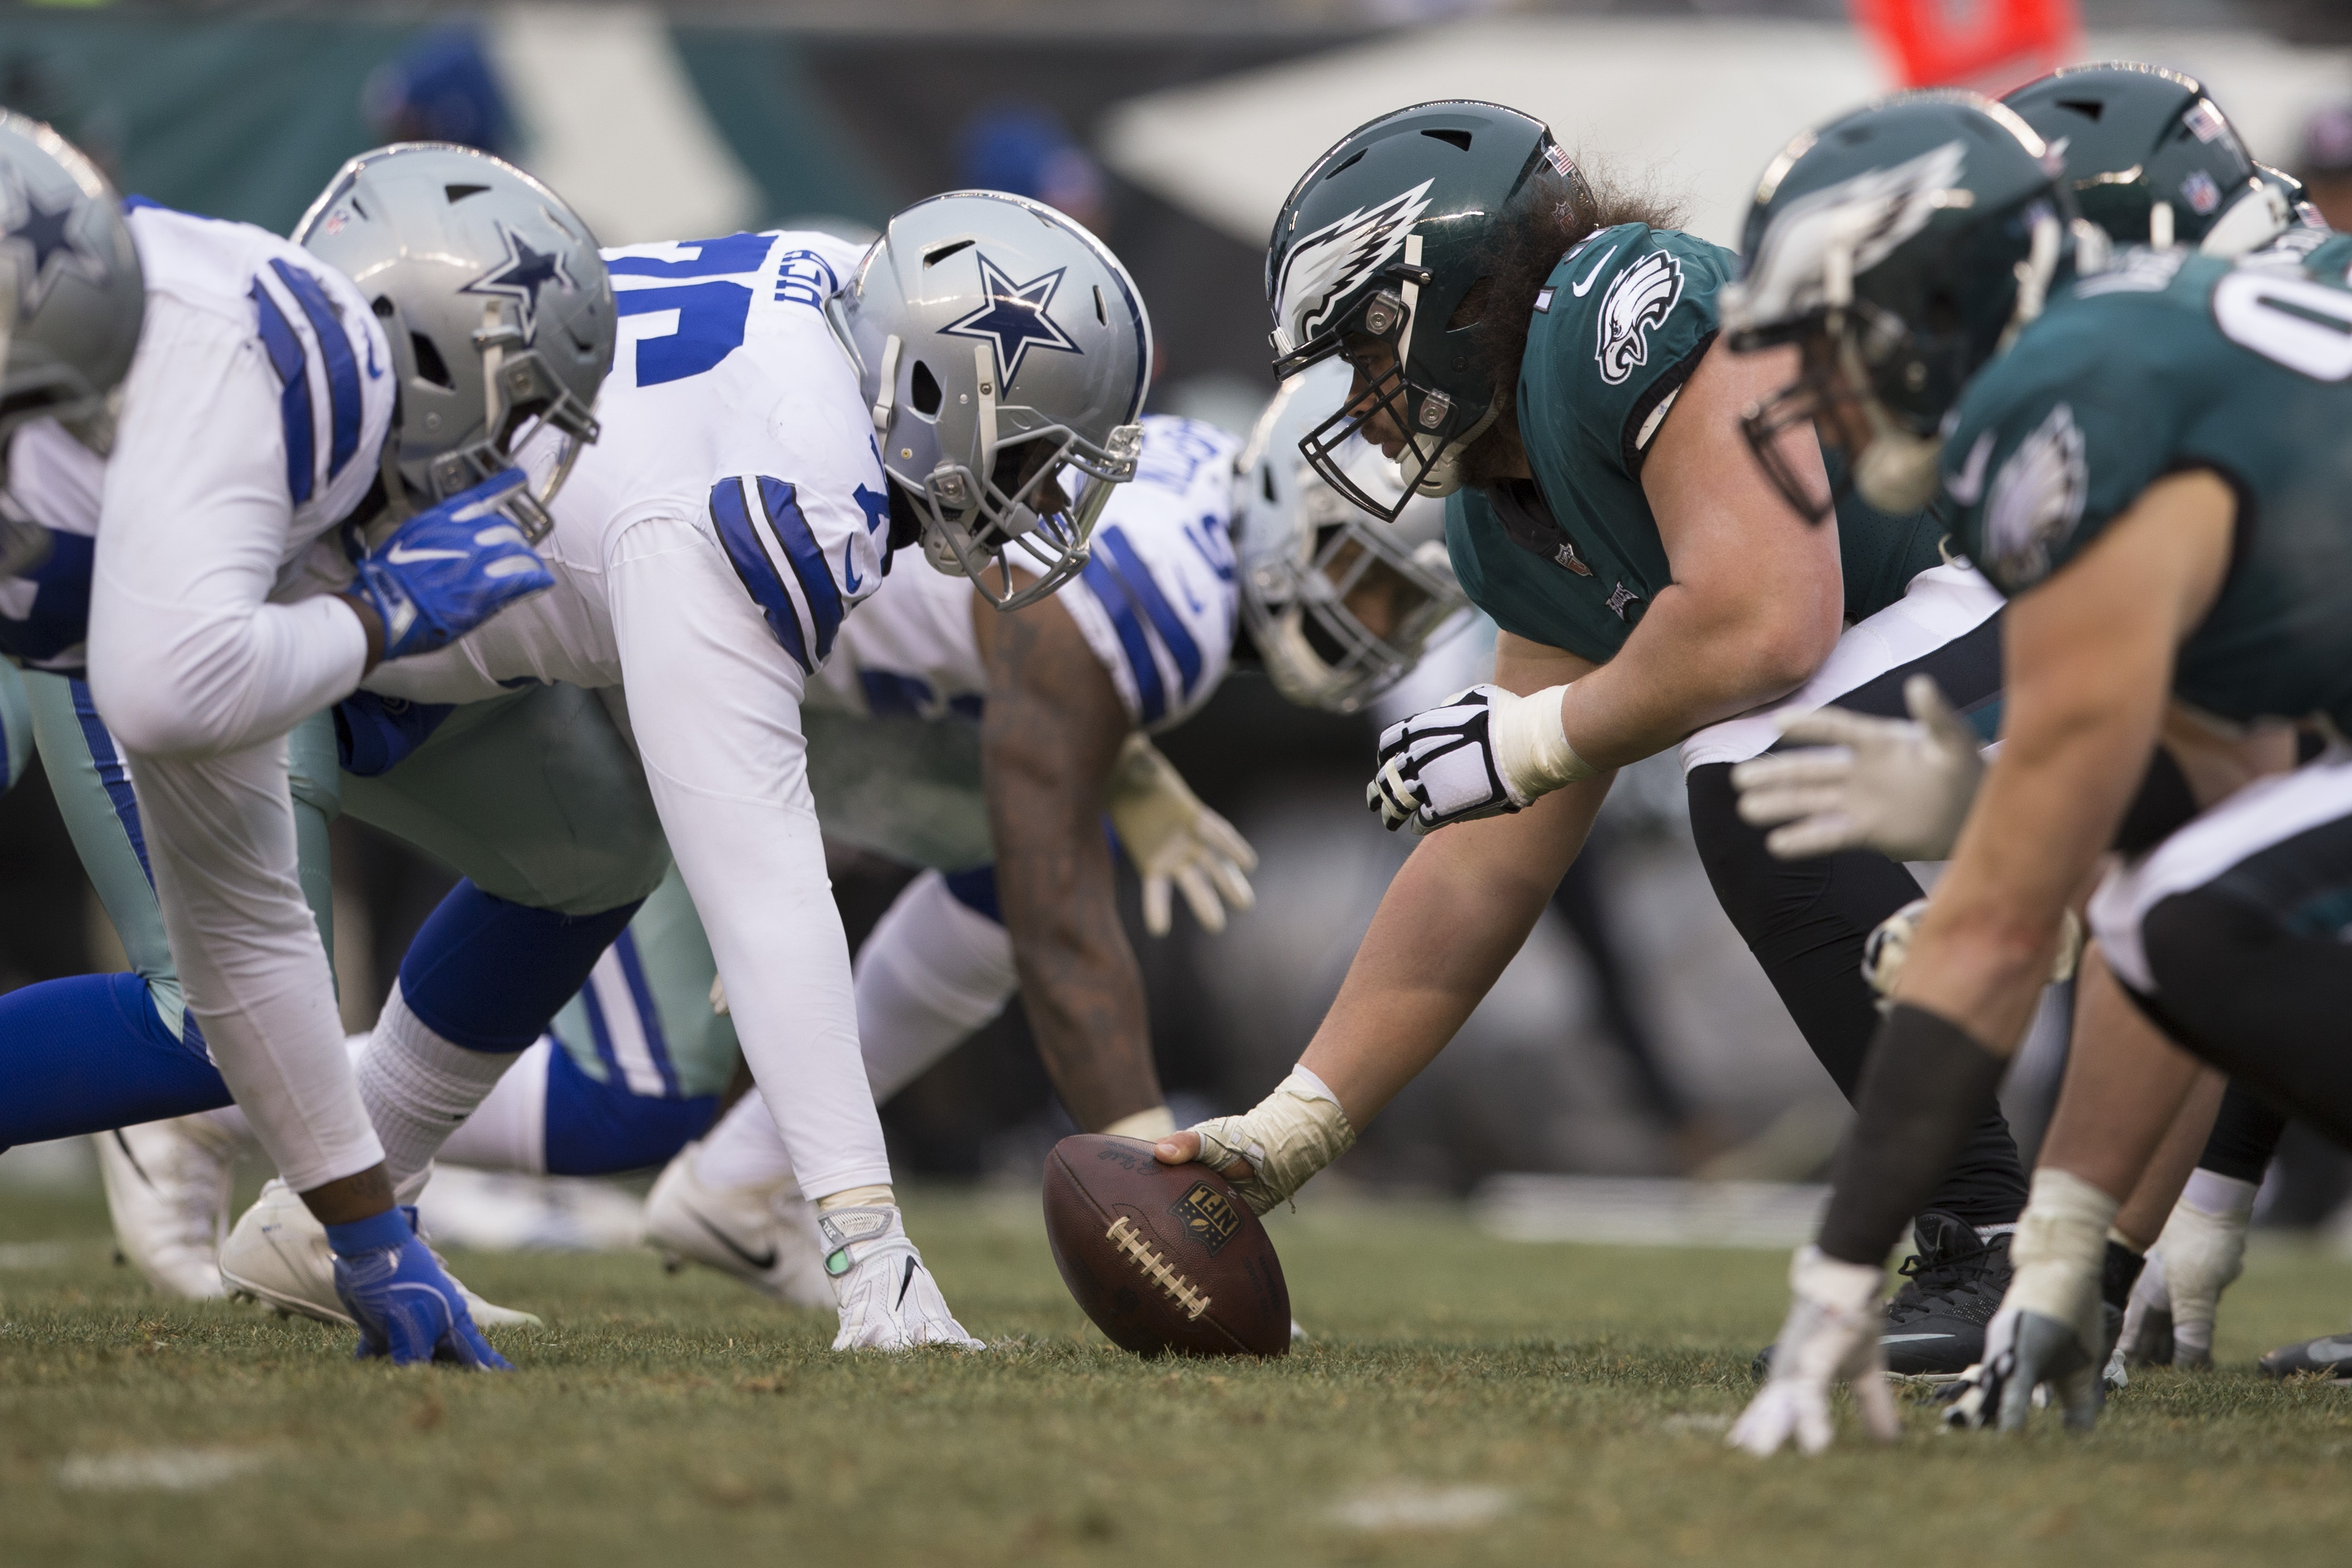 Eagles vs. Buccaneers: How to watch, stream Monday Night Football for free  